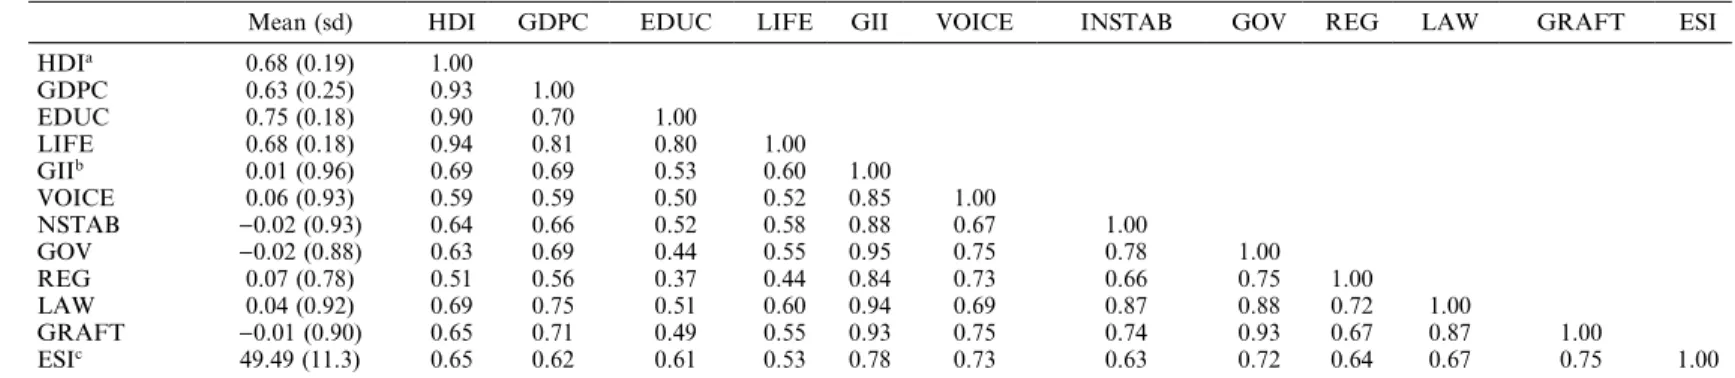 Table 1. Correlation matrix: governance infrastructure and other measures n ¼ 144